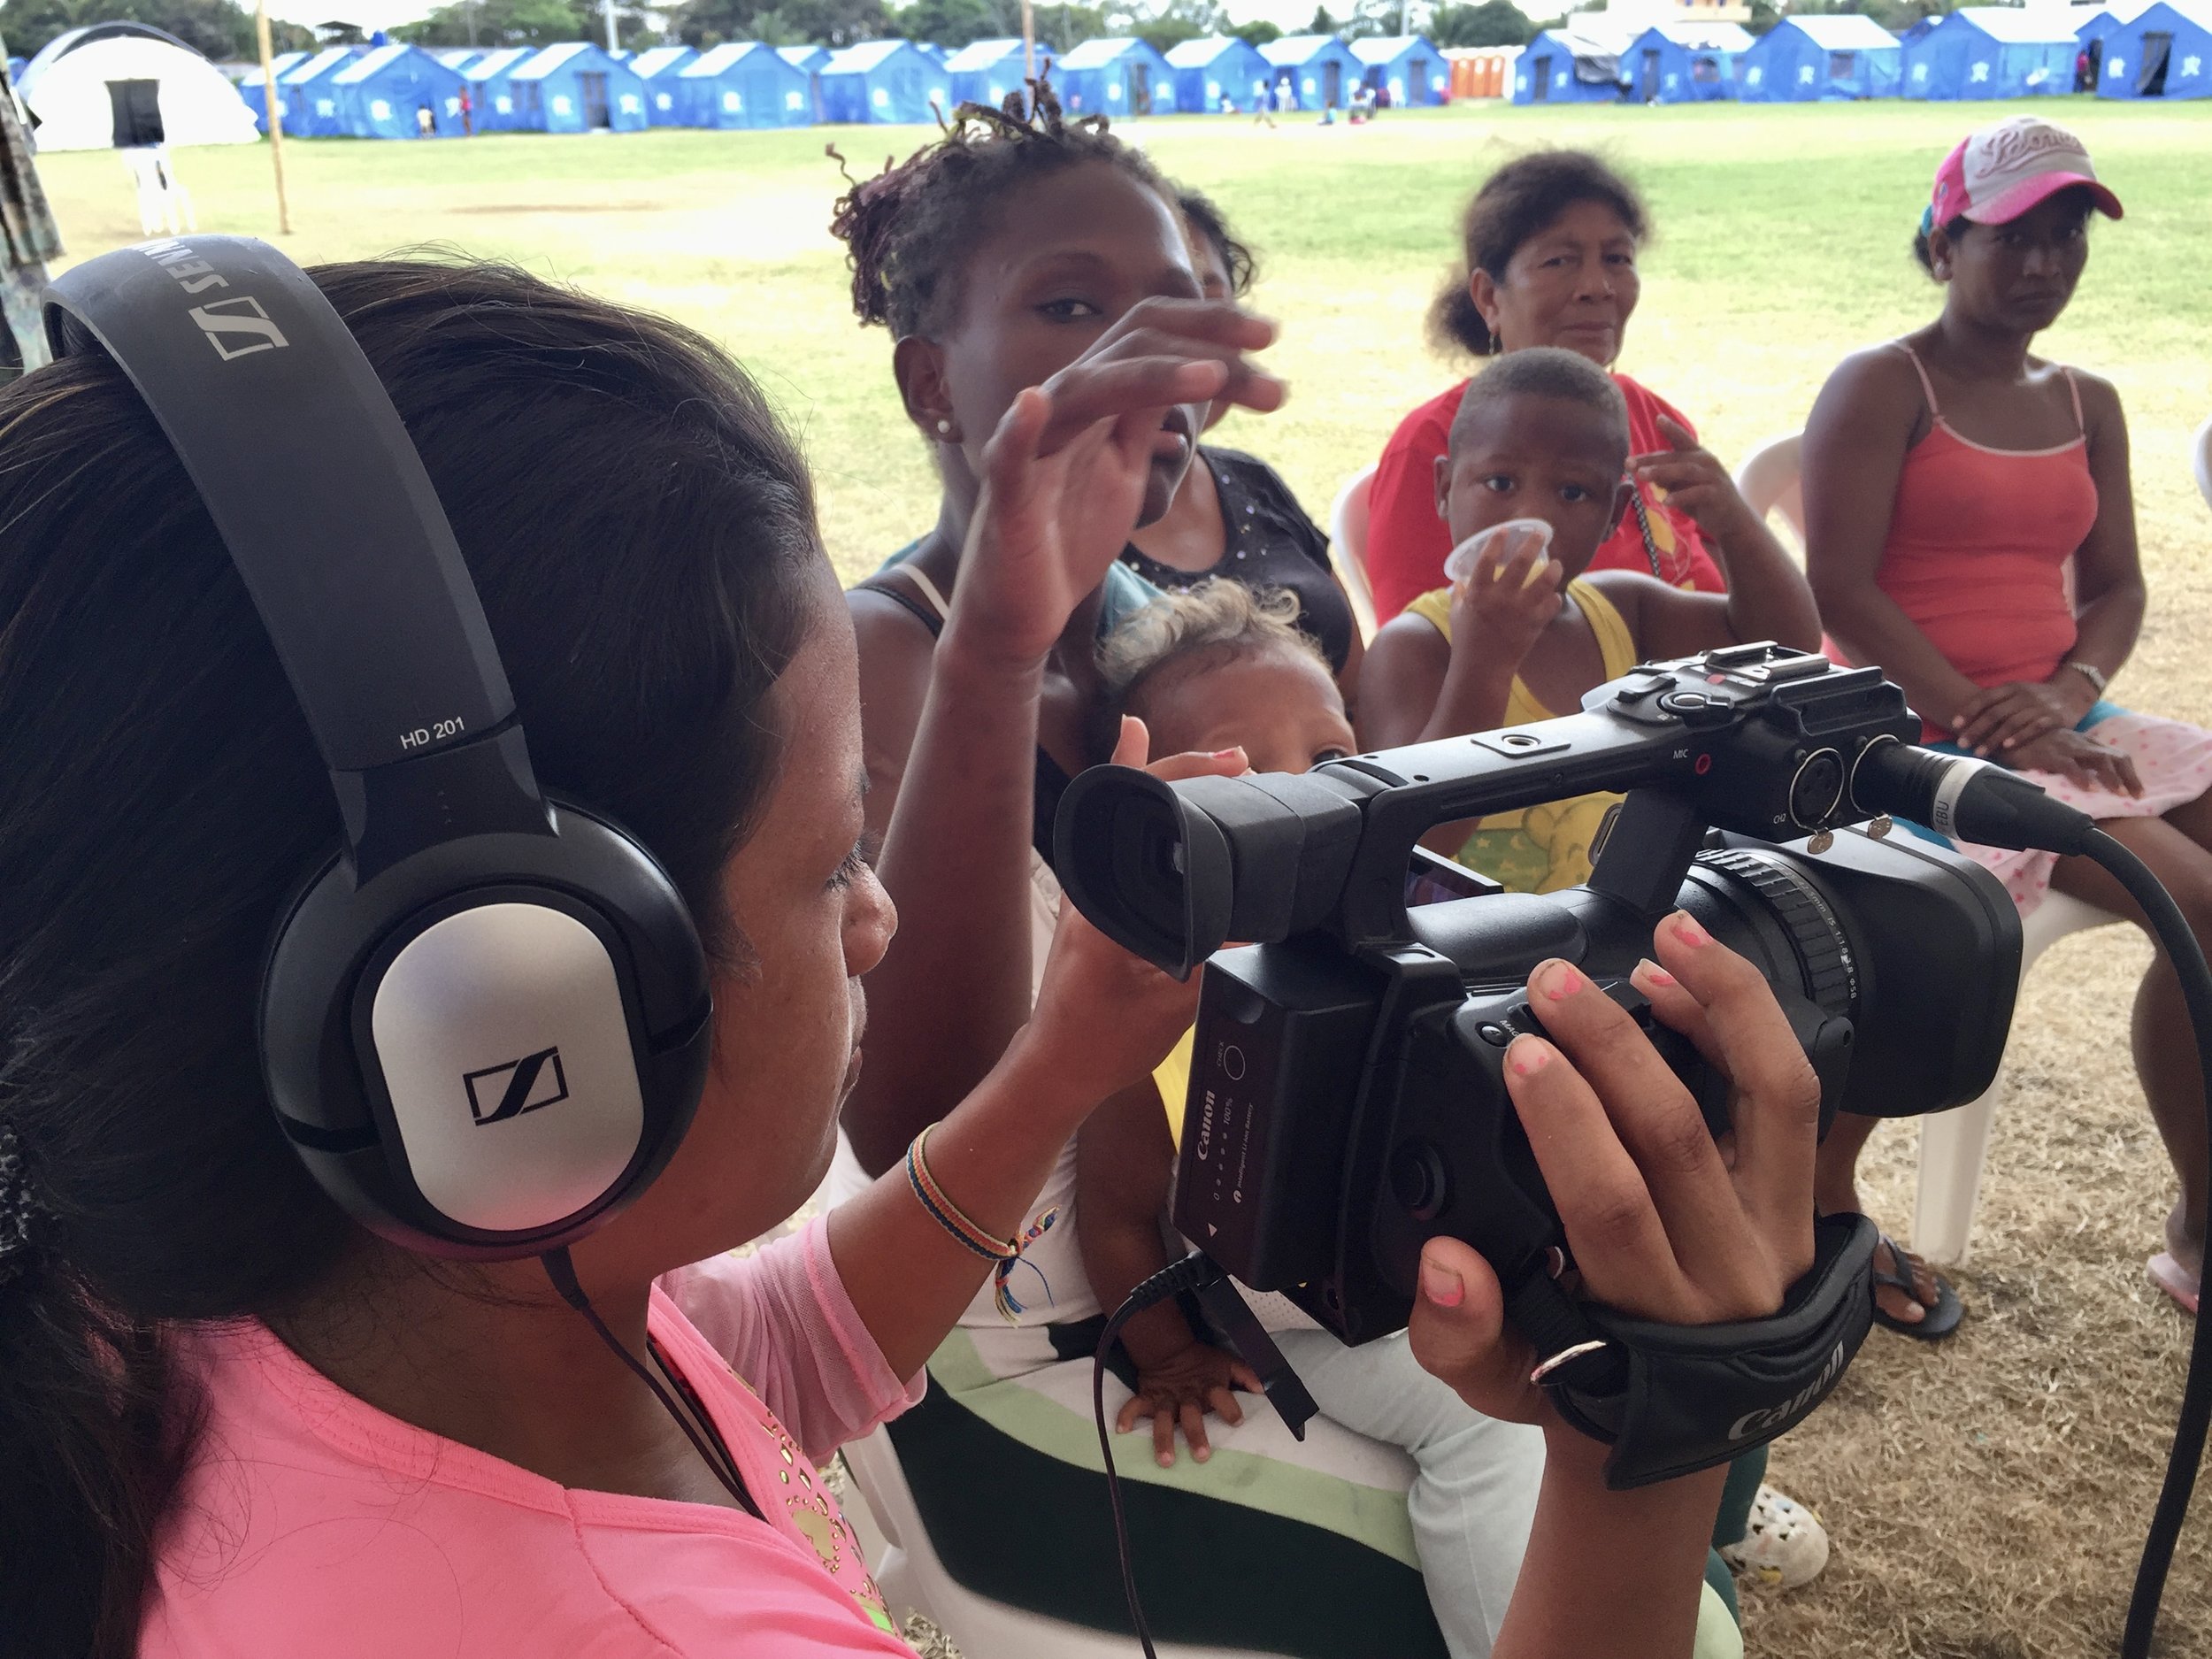 Women at an IDP camp in Ecuador learn how to capture community suggestions addressed to camp managers